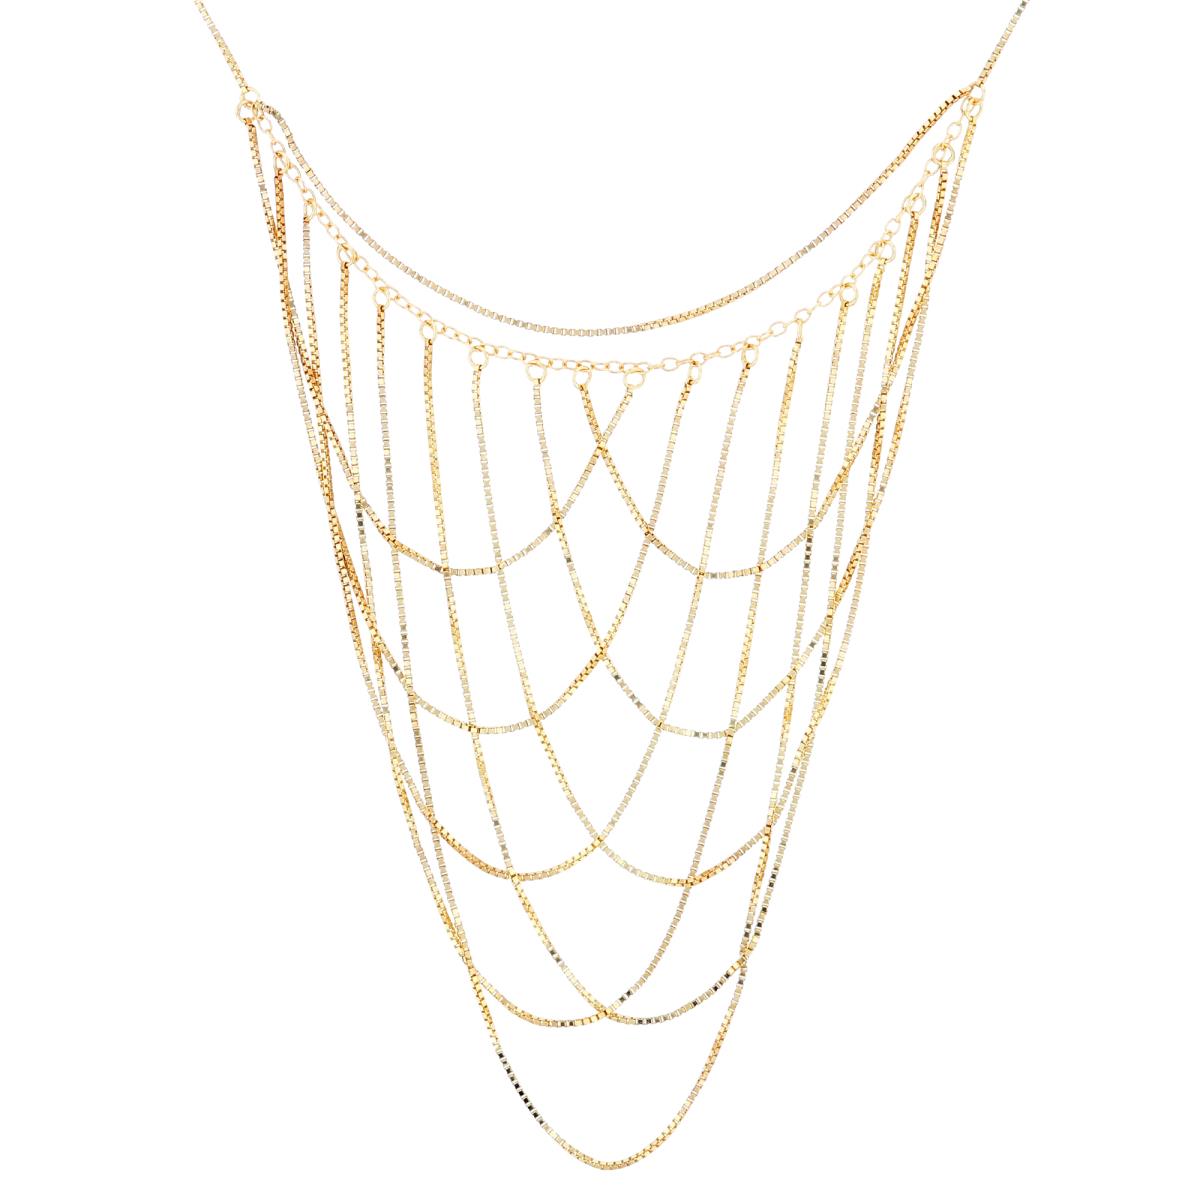 14K Yellow Gold DC Multi-Strand Layered 17-18" Adjustable Box Chain Necklace